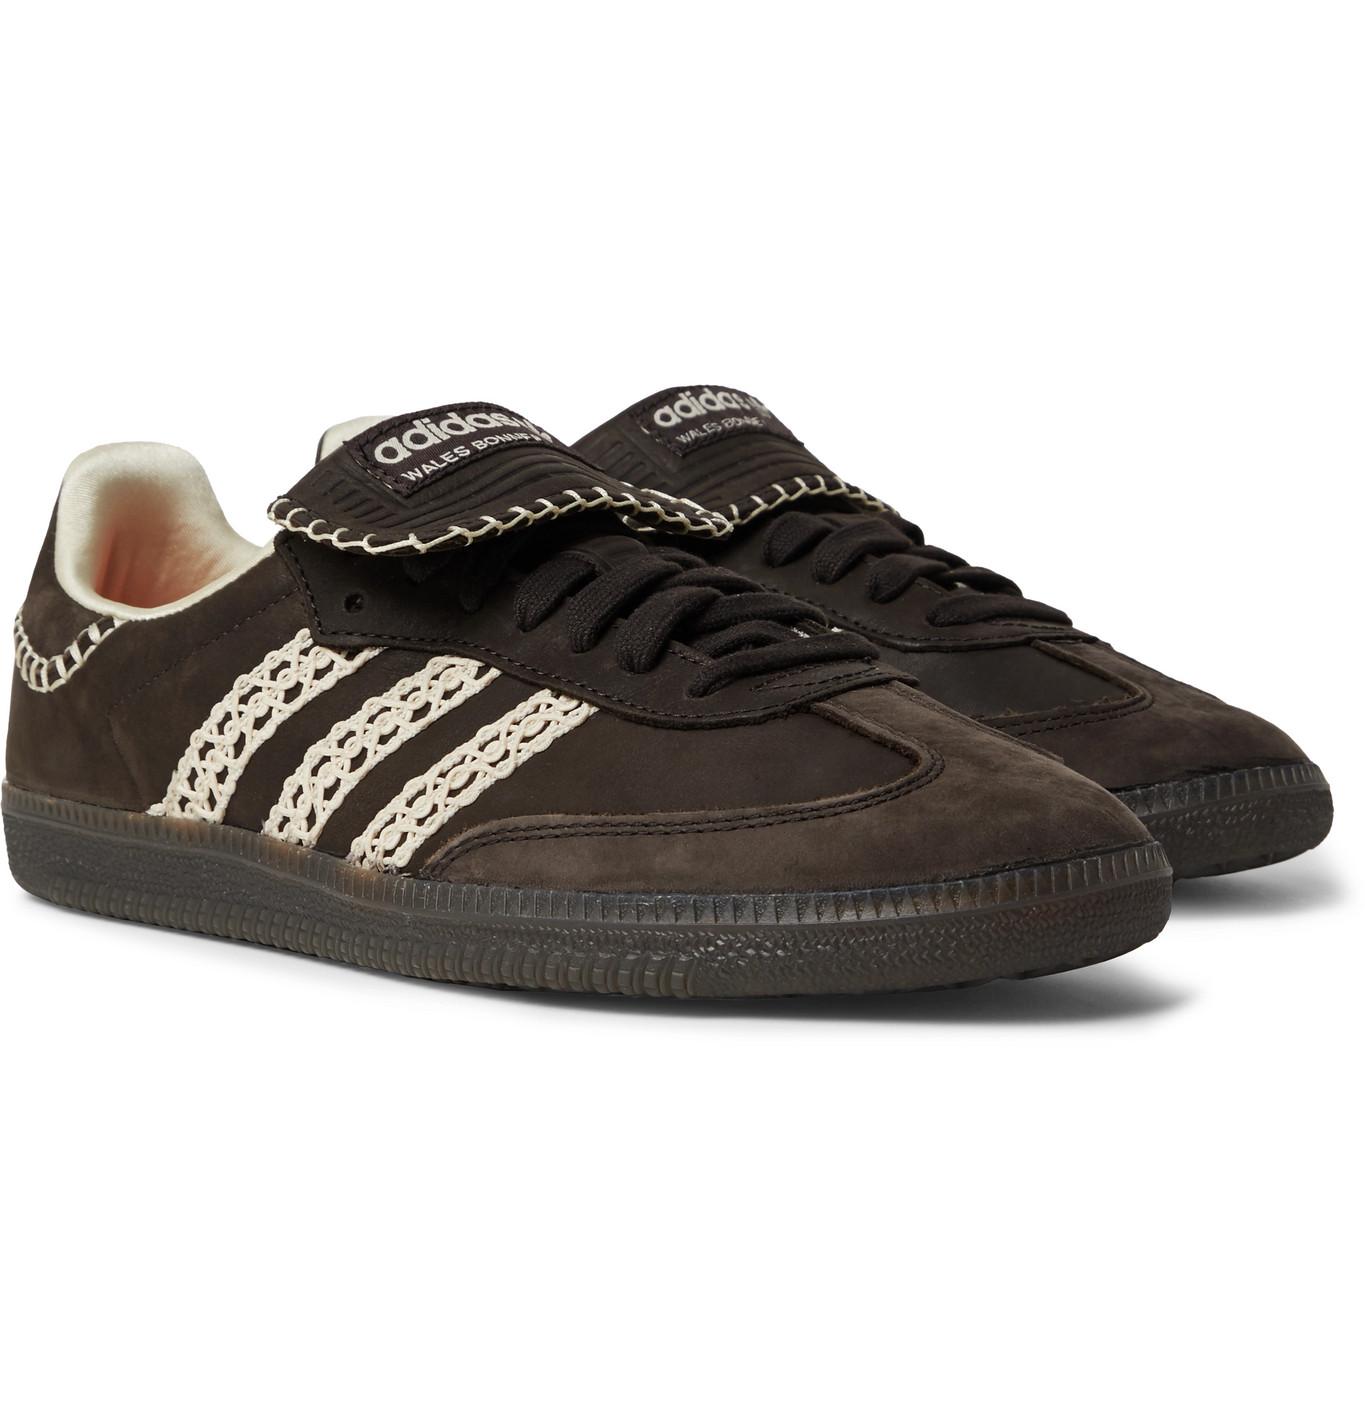 adidas Originals Wales Bonner Samba Crochet- And Leather-trimmed Suede